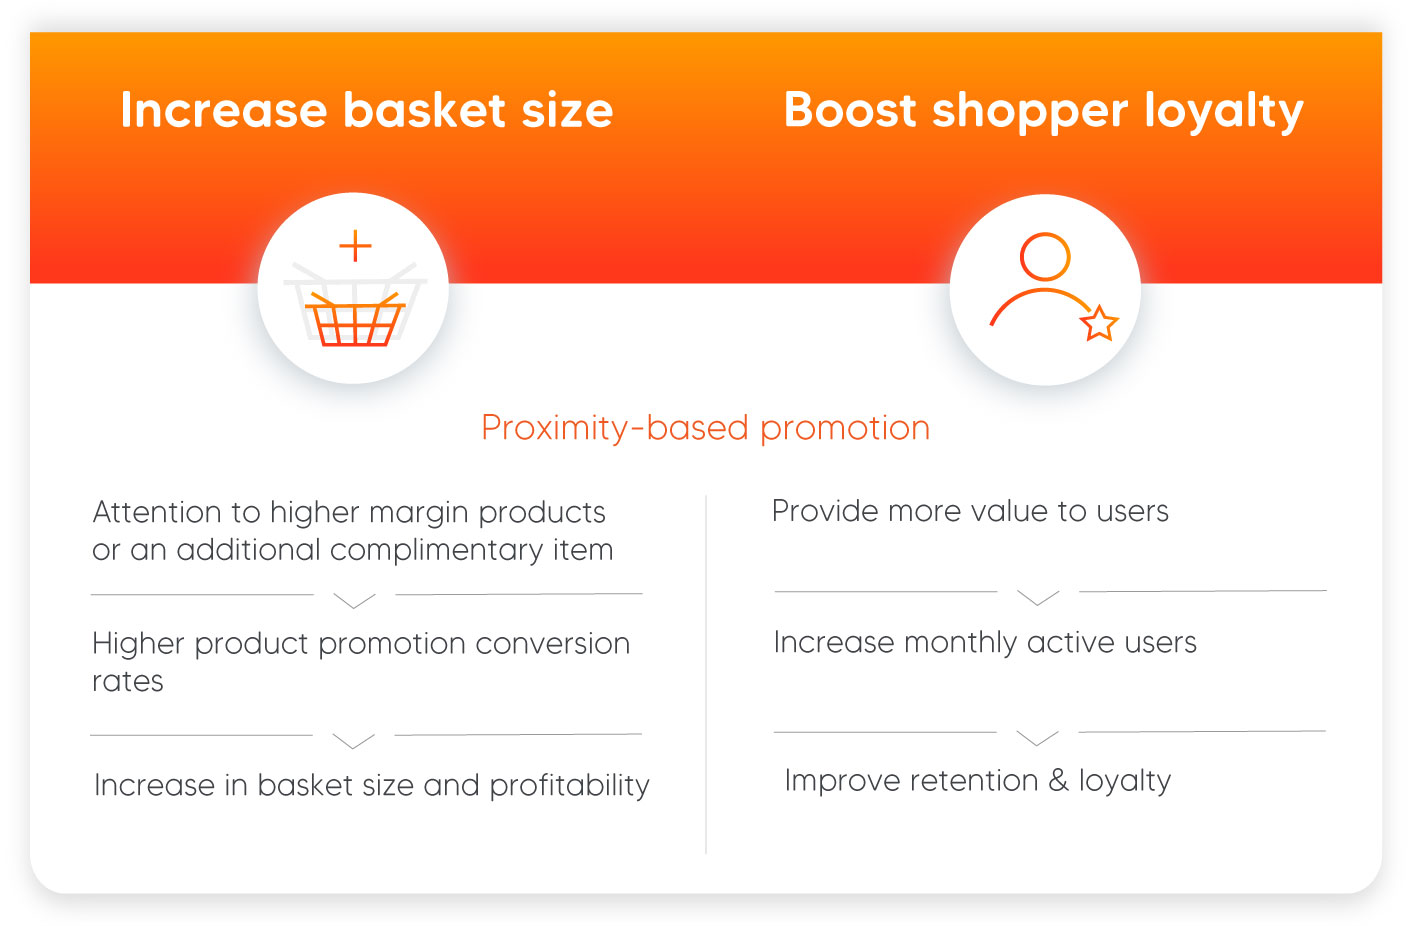 Proximity promotions lead to increased basket size and enhanced shopper loyalty